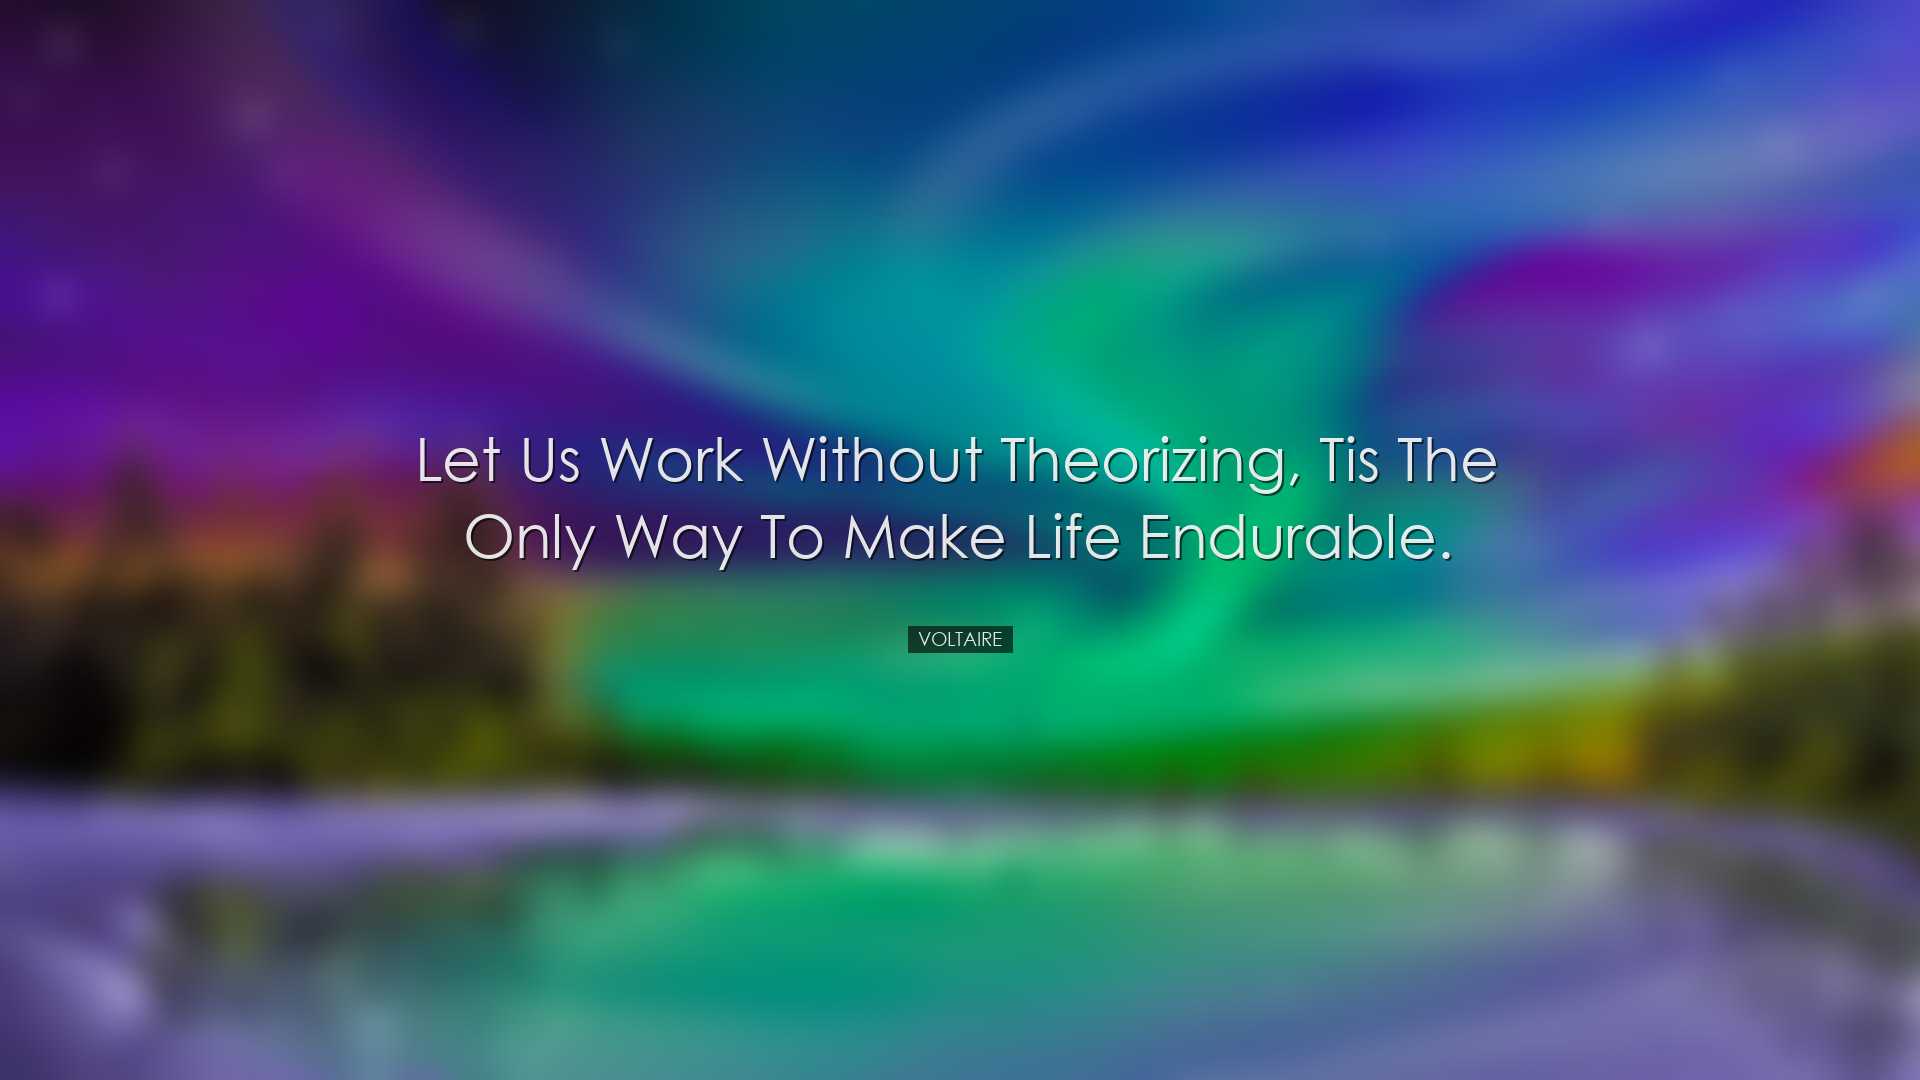 Let us work without theorizing, tis the only way to make life endu